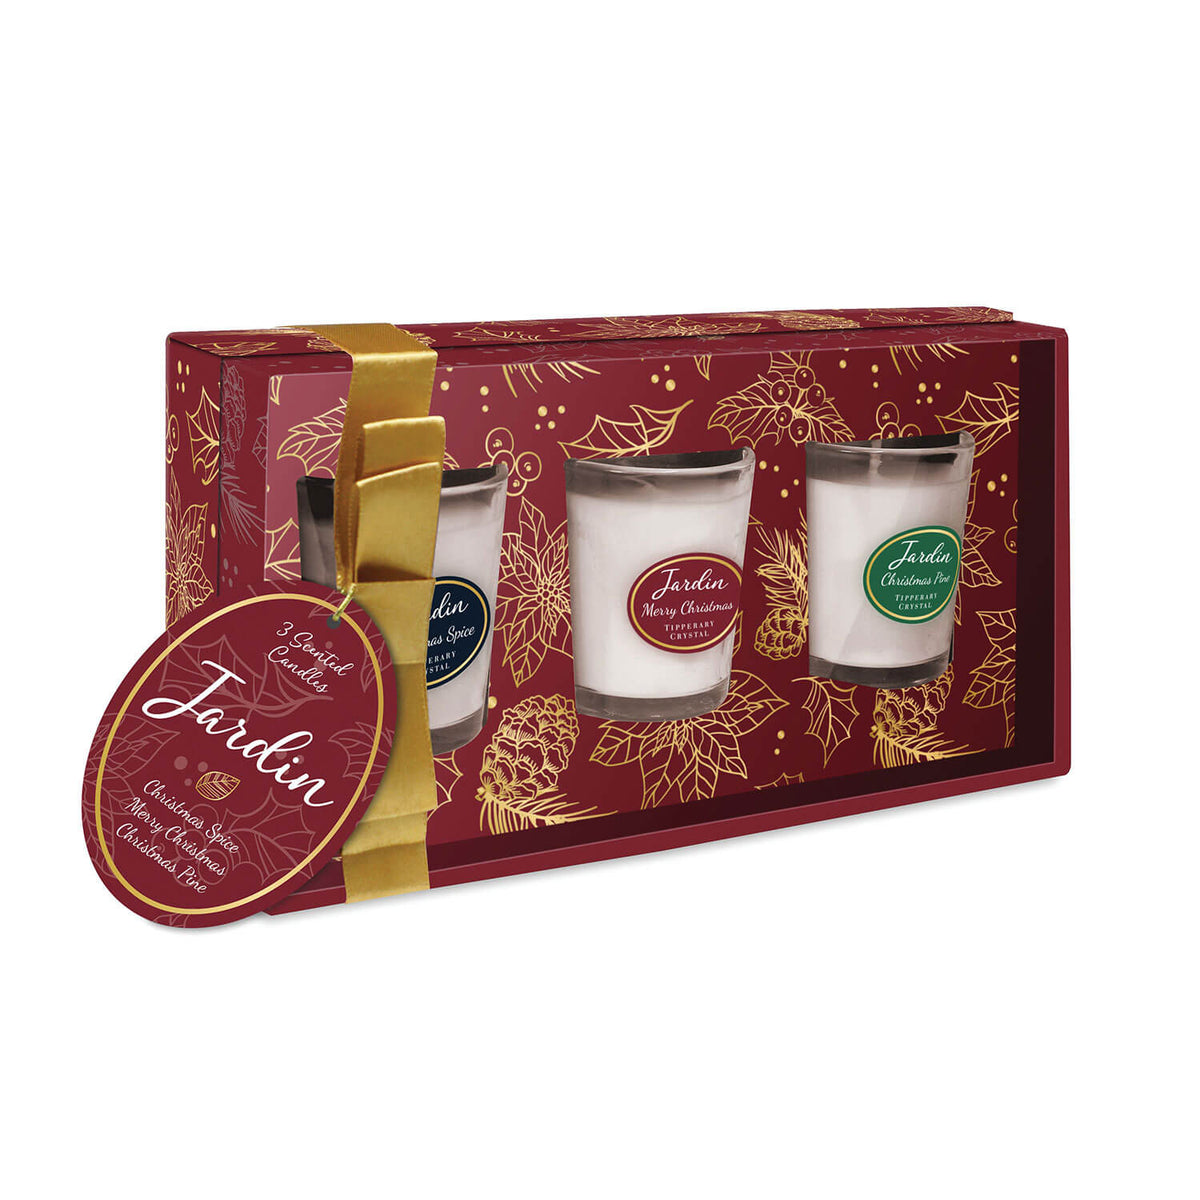 Jardin Collection Set of 3 Mini Candles